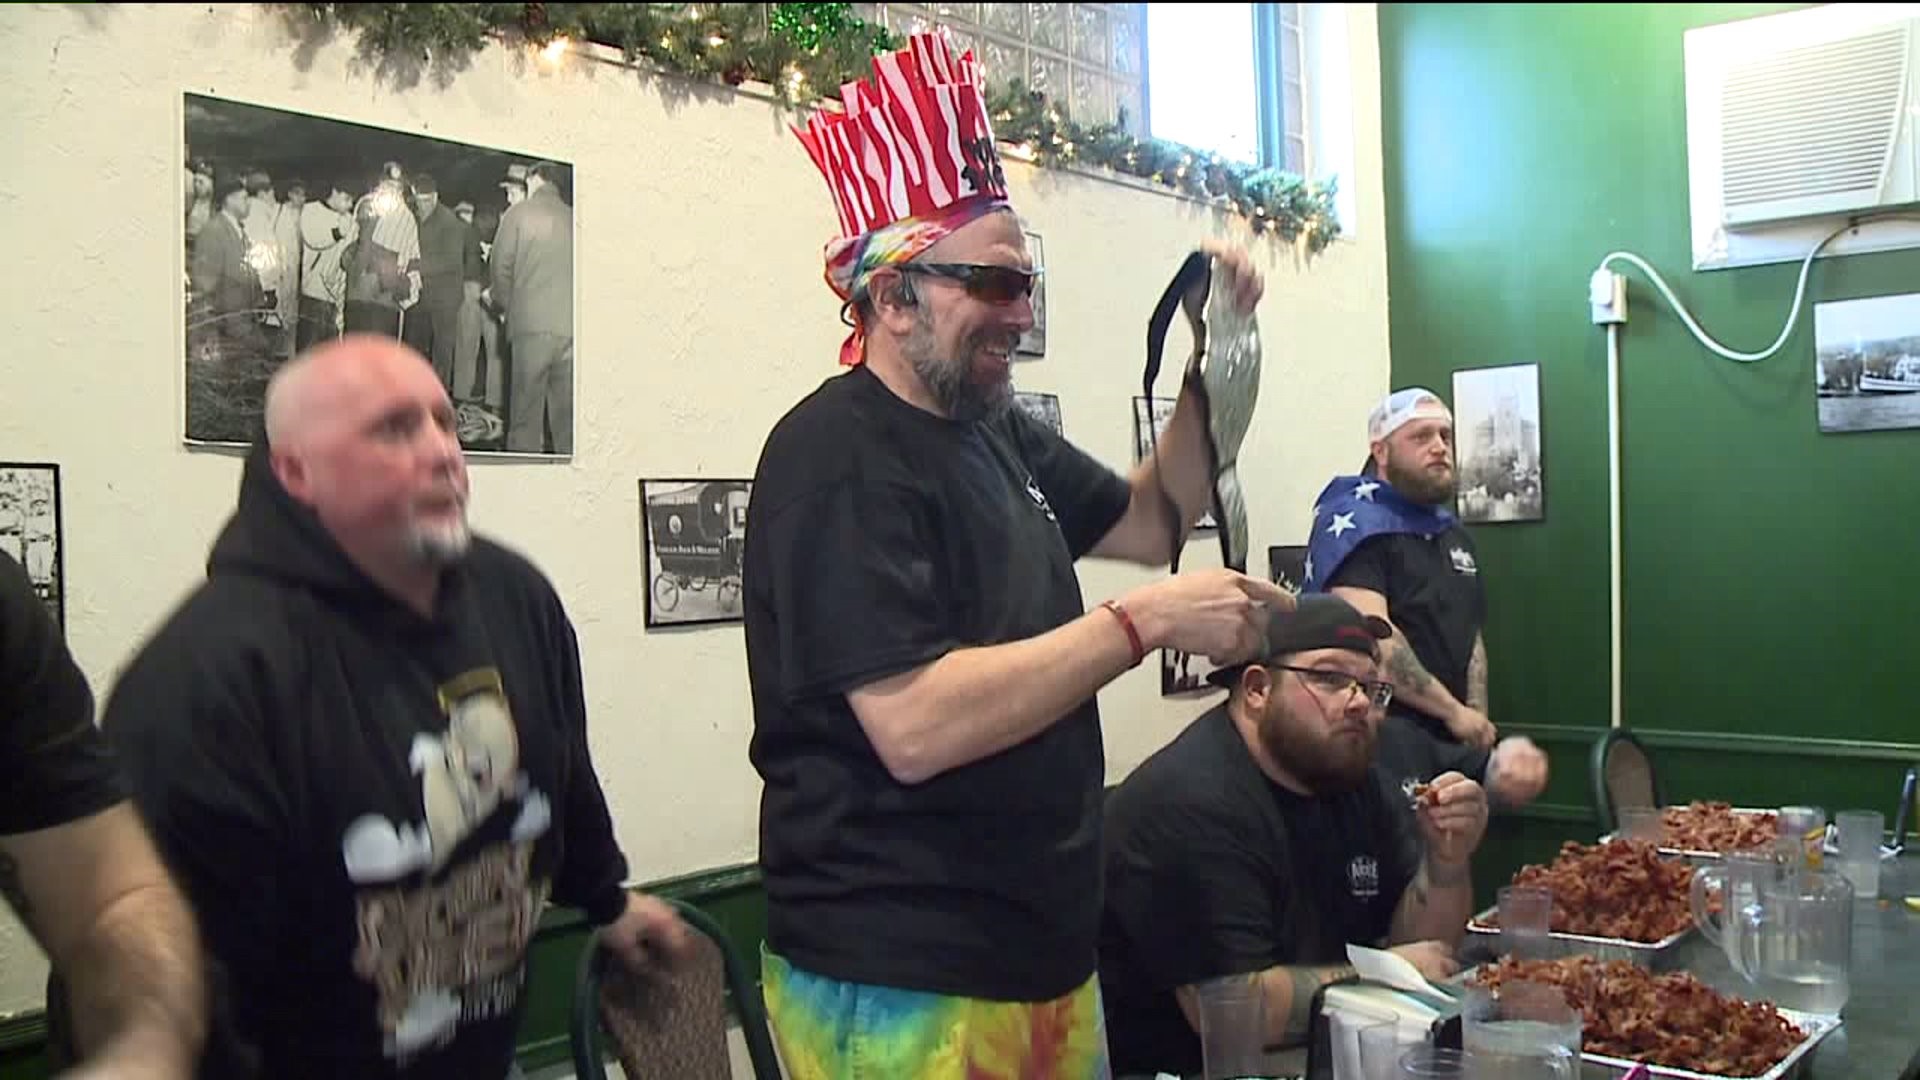 Wilkes-Barre Restaurant Holds Bacon Eating Contest